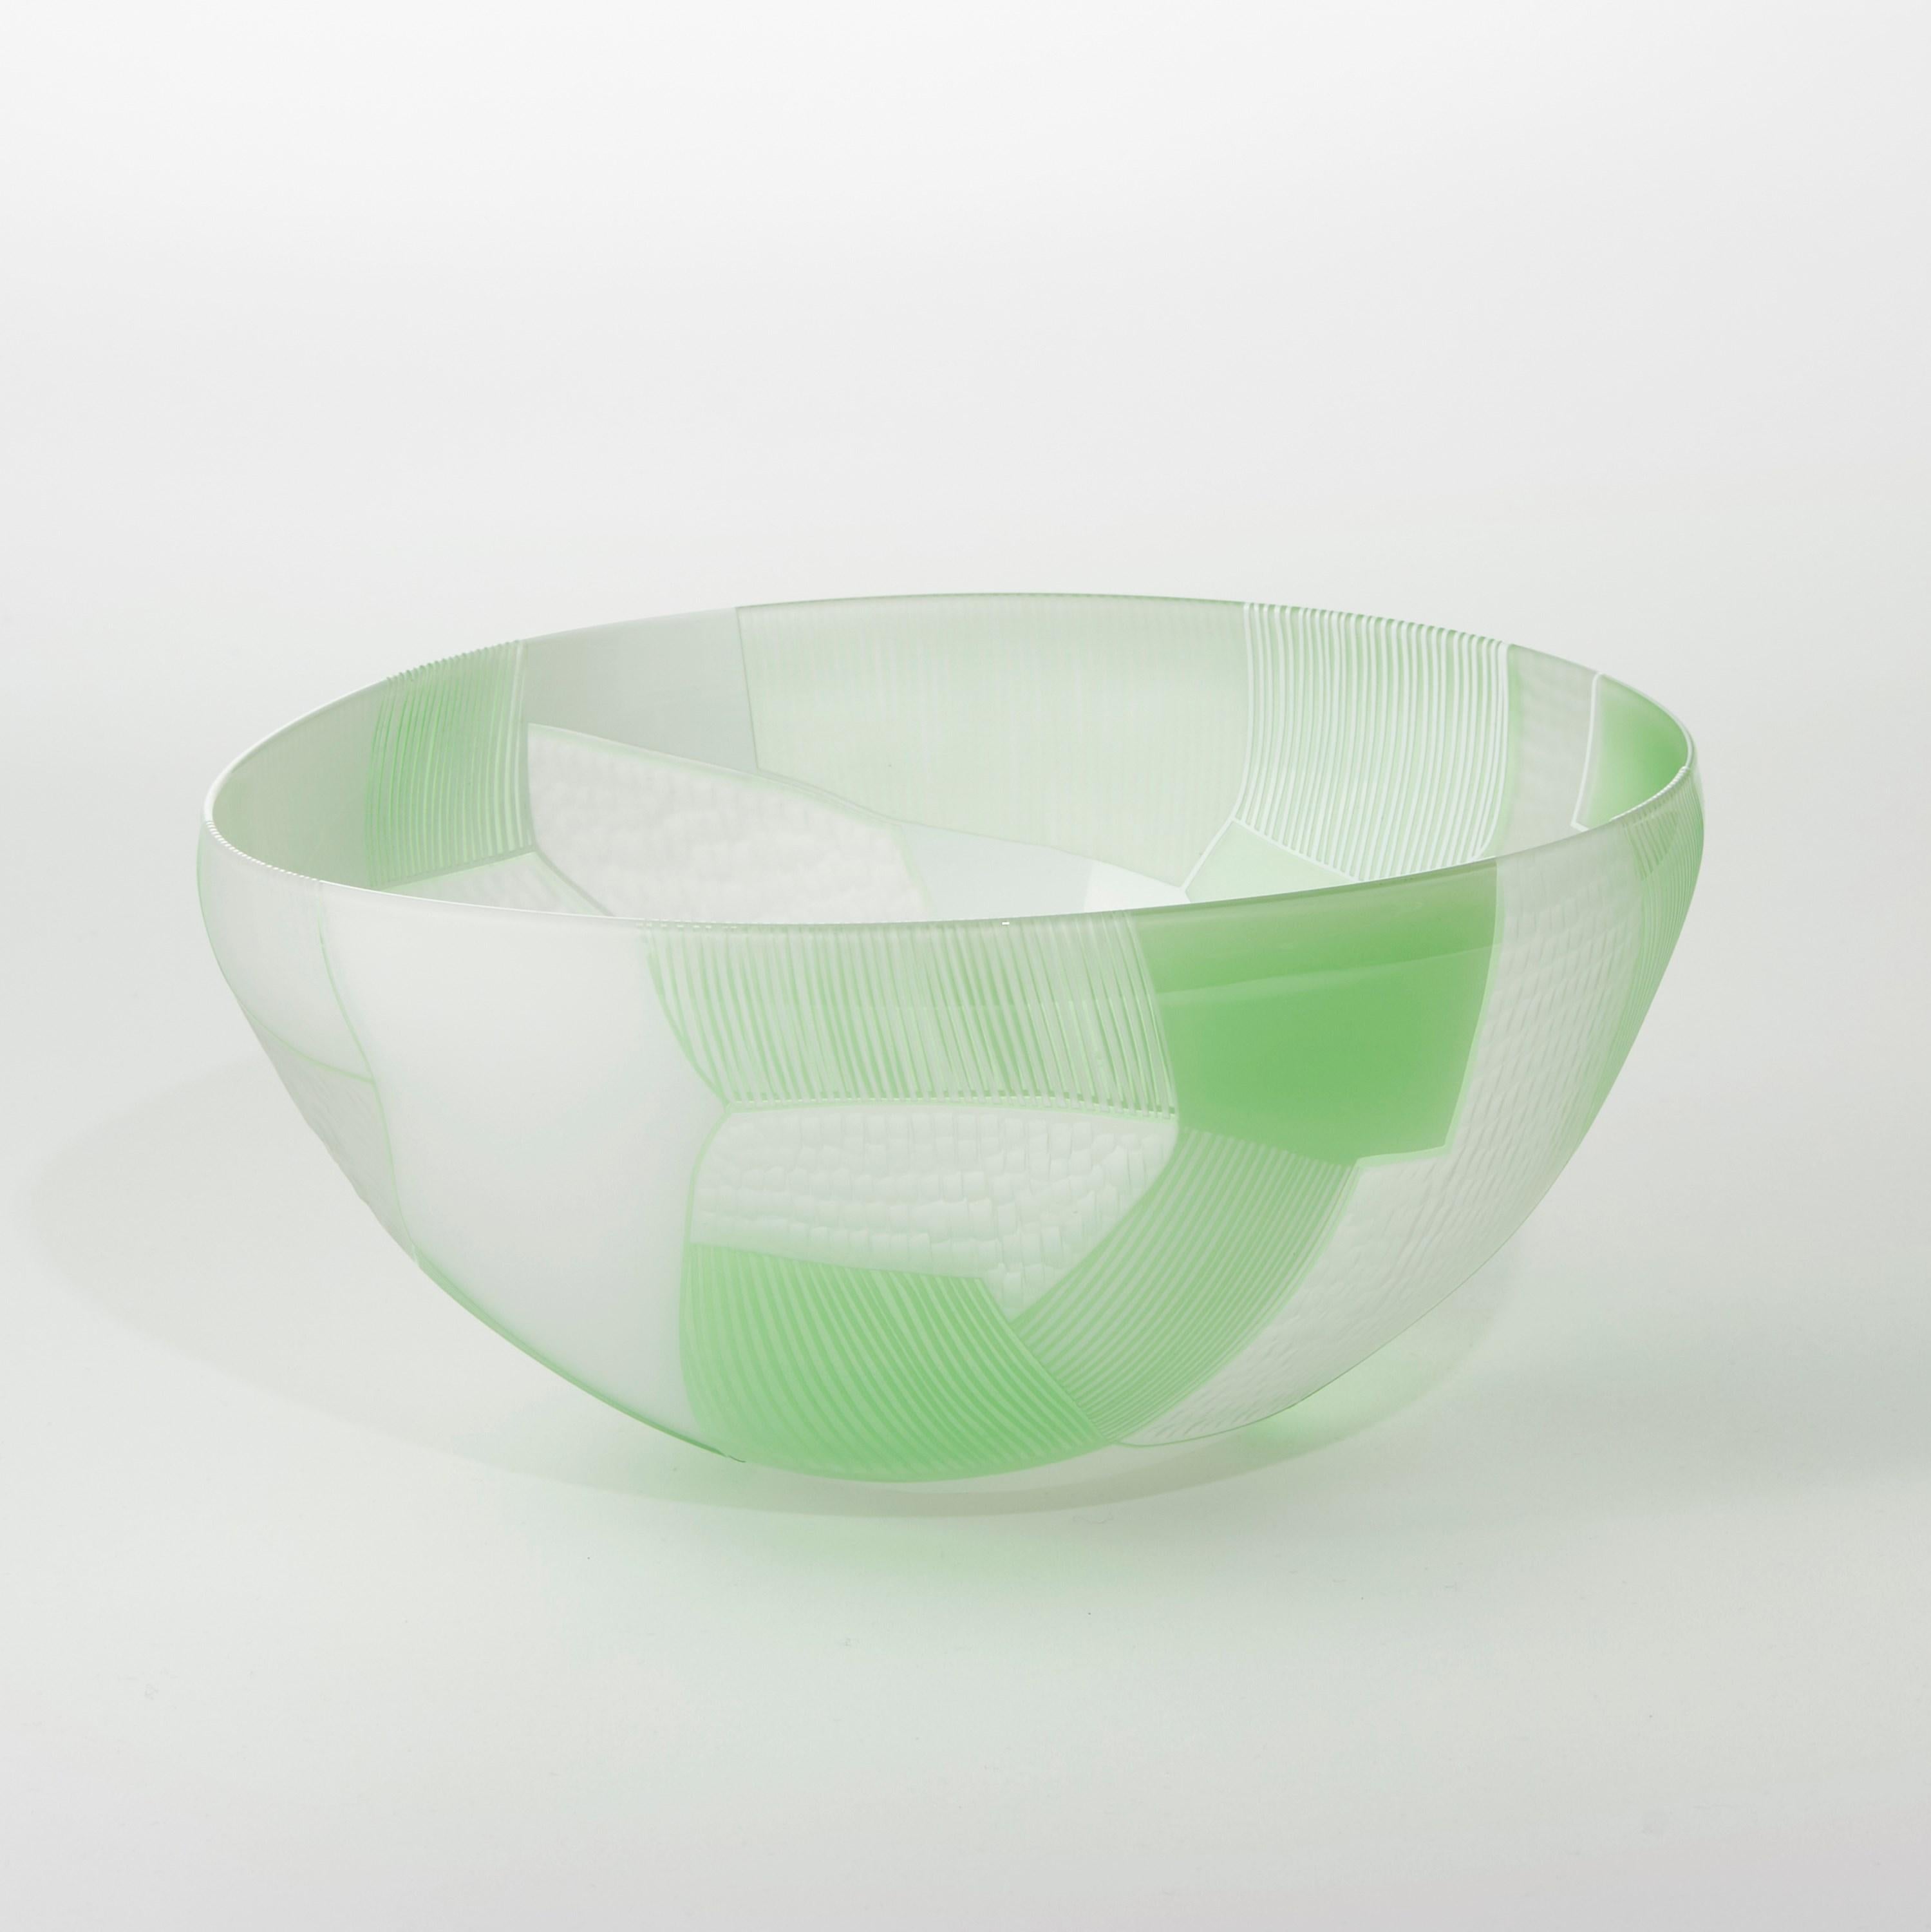 'Landscape Study Green over White' is a unique handblown and cut glass sculptural bowl by the British artist, Kate Jones of Gillies Jones.

Gillies Jones established their partnership in 1995 with a shared passion to explore blown art glass. Works